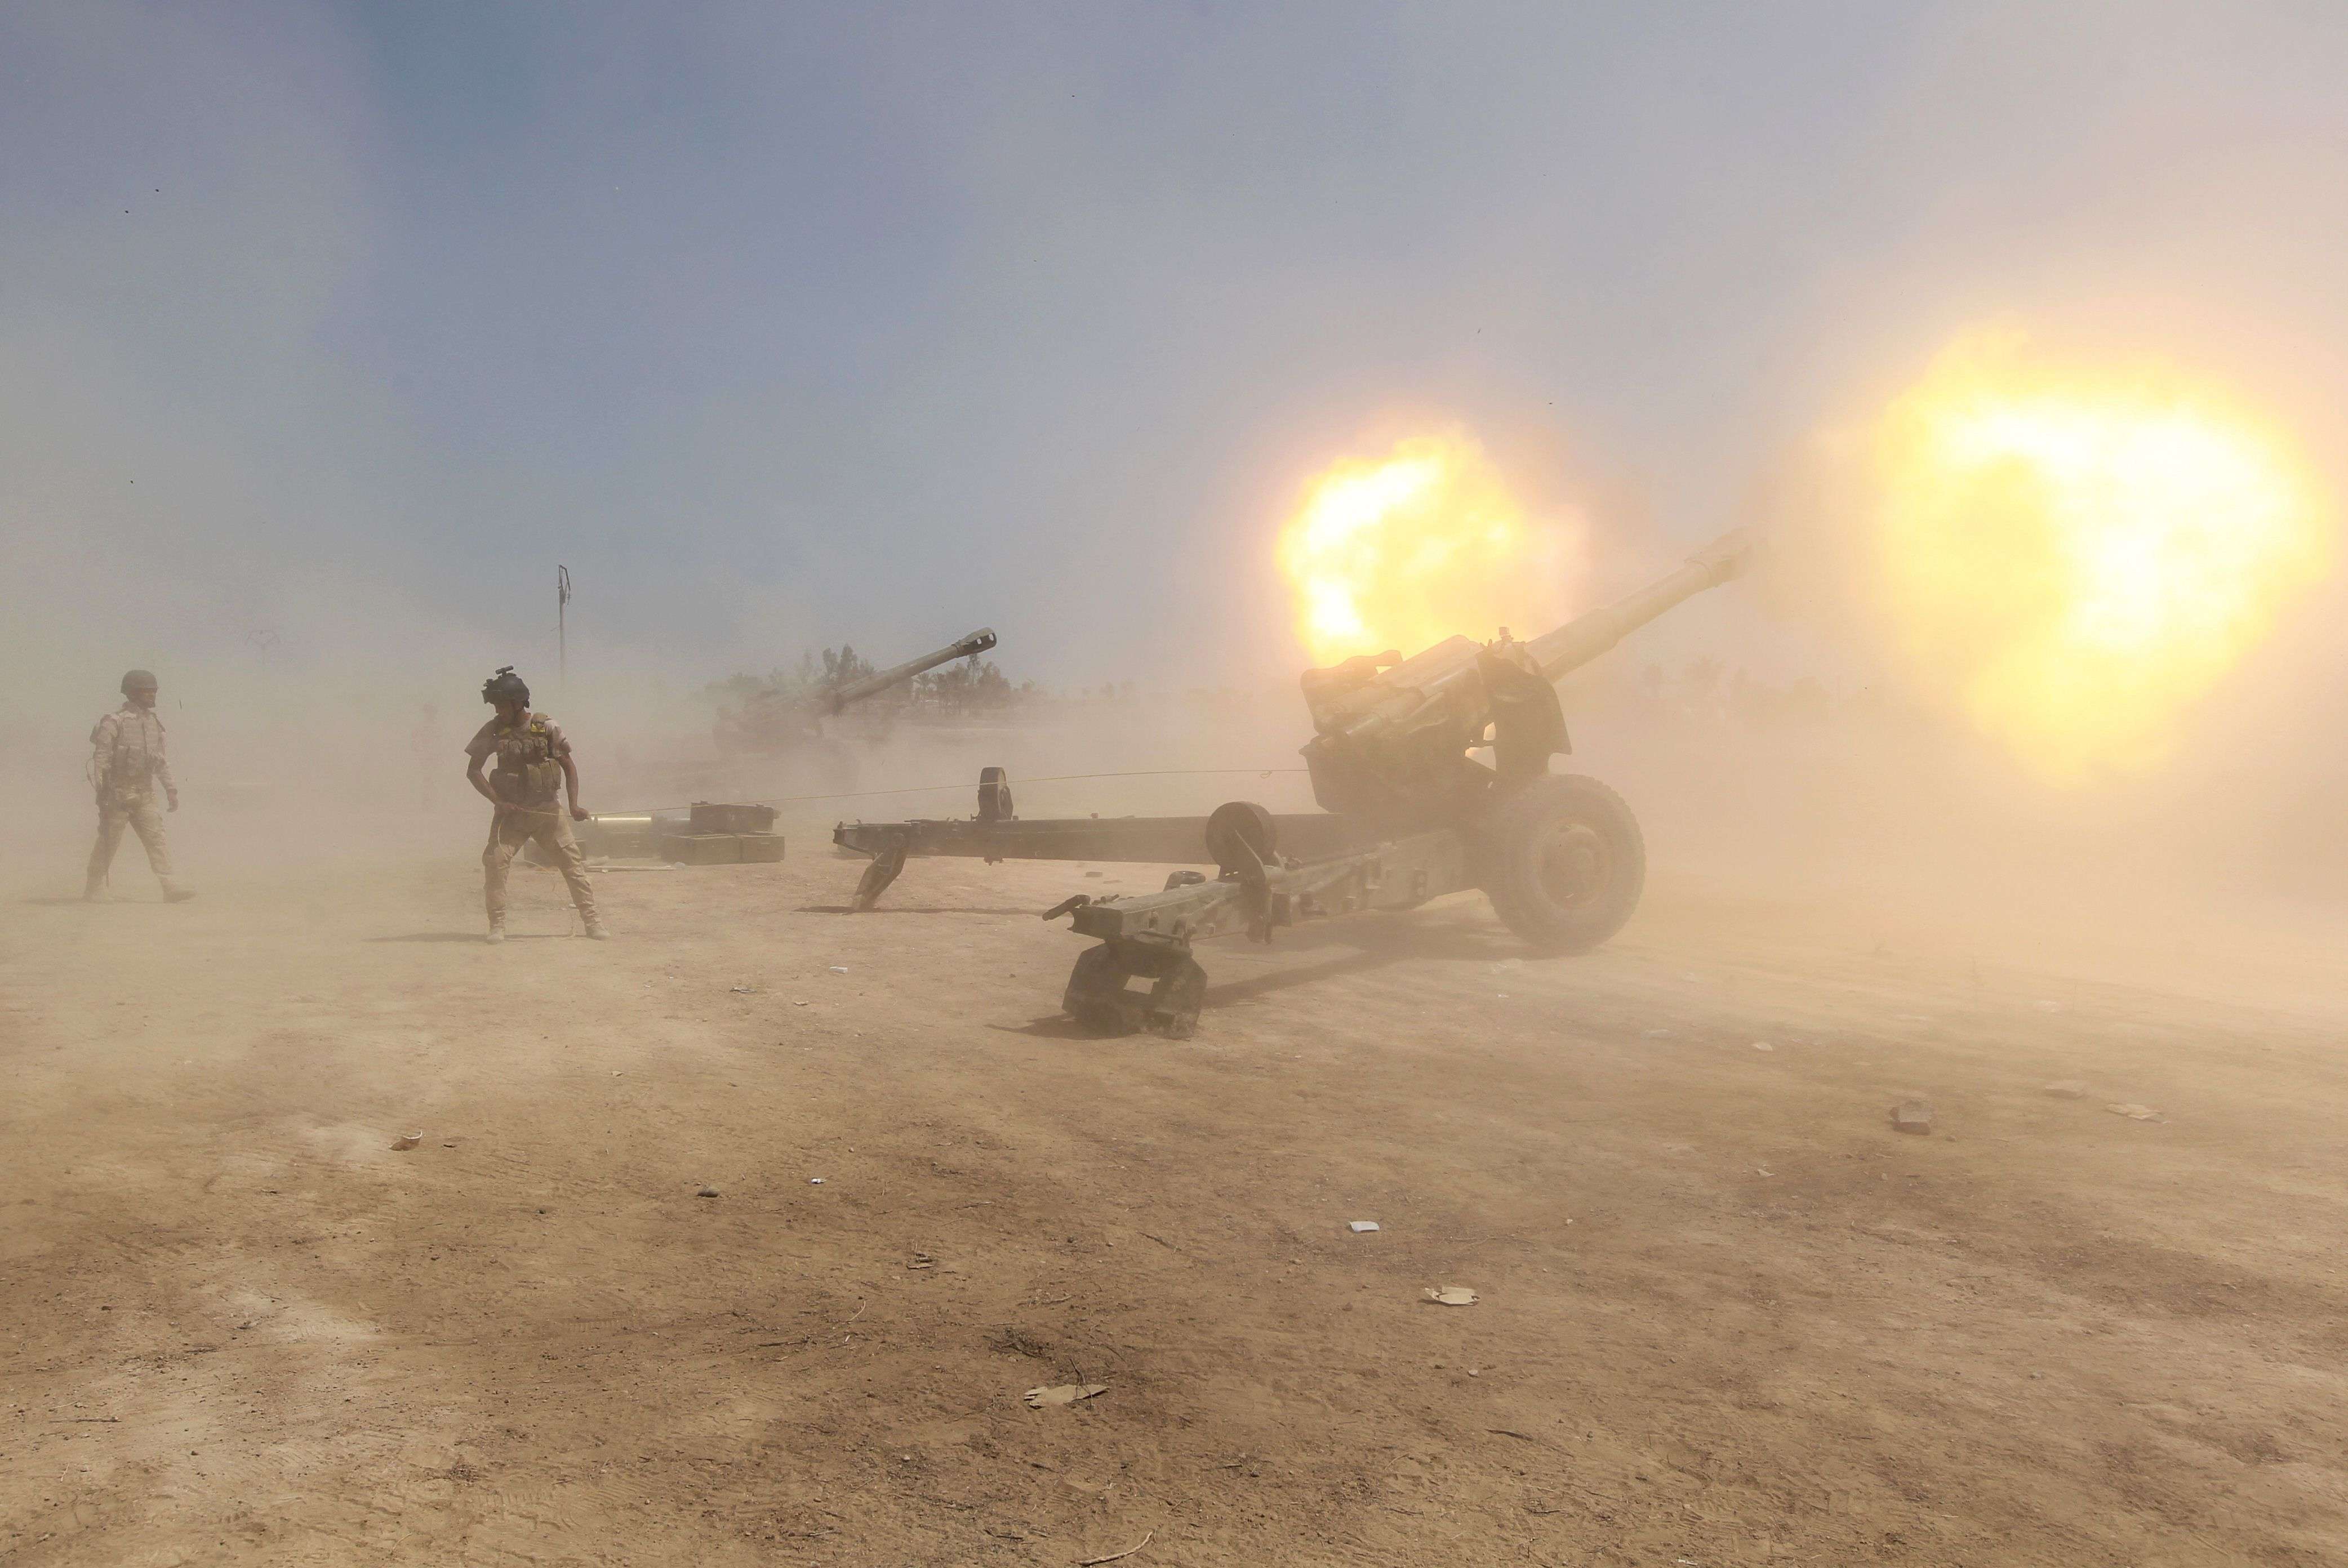 Iraqi forces fire artillery towards Islamic State (IS) group positions in the Garma district, west of the Iraqi capital Baghdad, where pro-government forces say they have recently made advances on areas held by Islamist jihadists. (AFP PHOTO/AHMAD AL-RUBAYE)